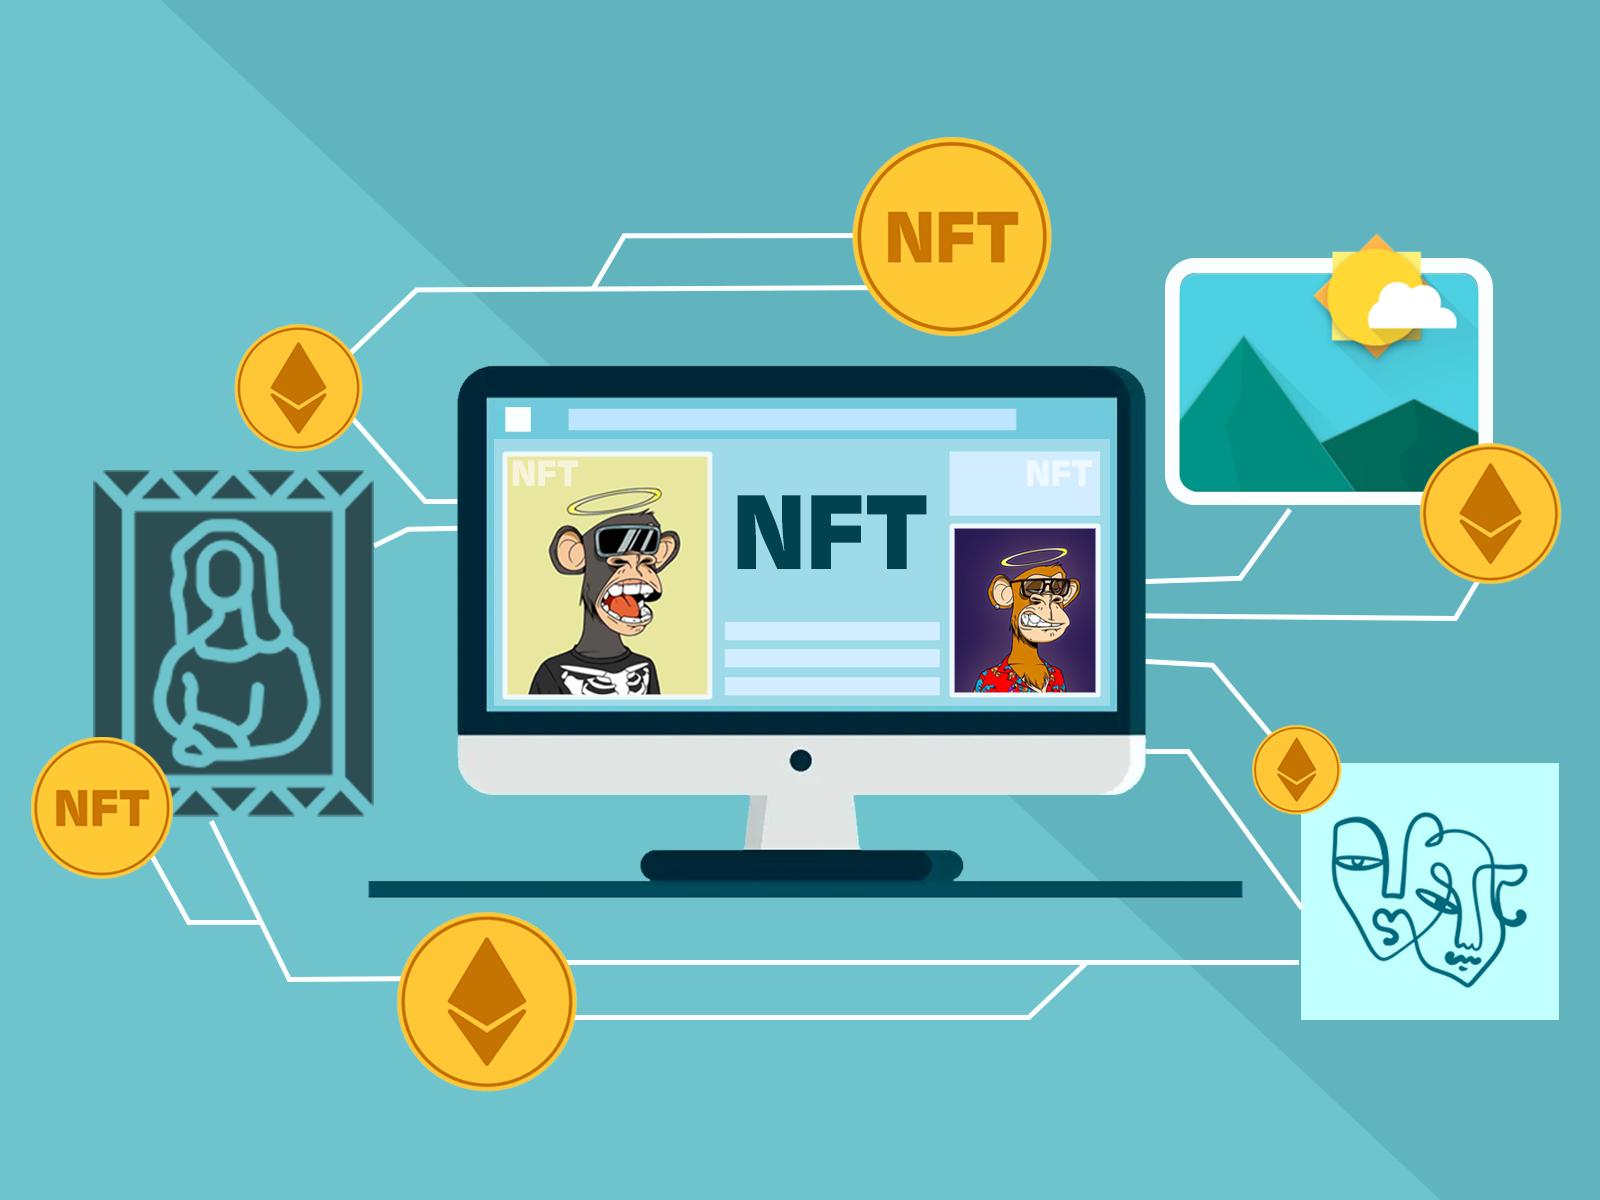 How OpenSea Makes Money: The NFT Marketplace's Business Model